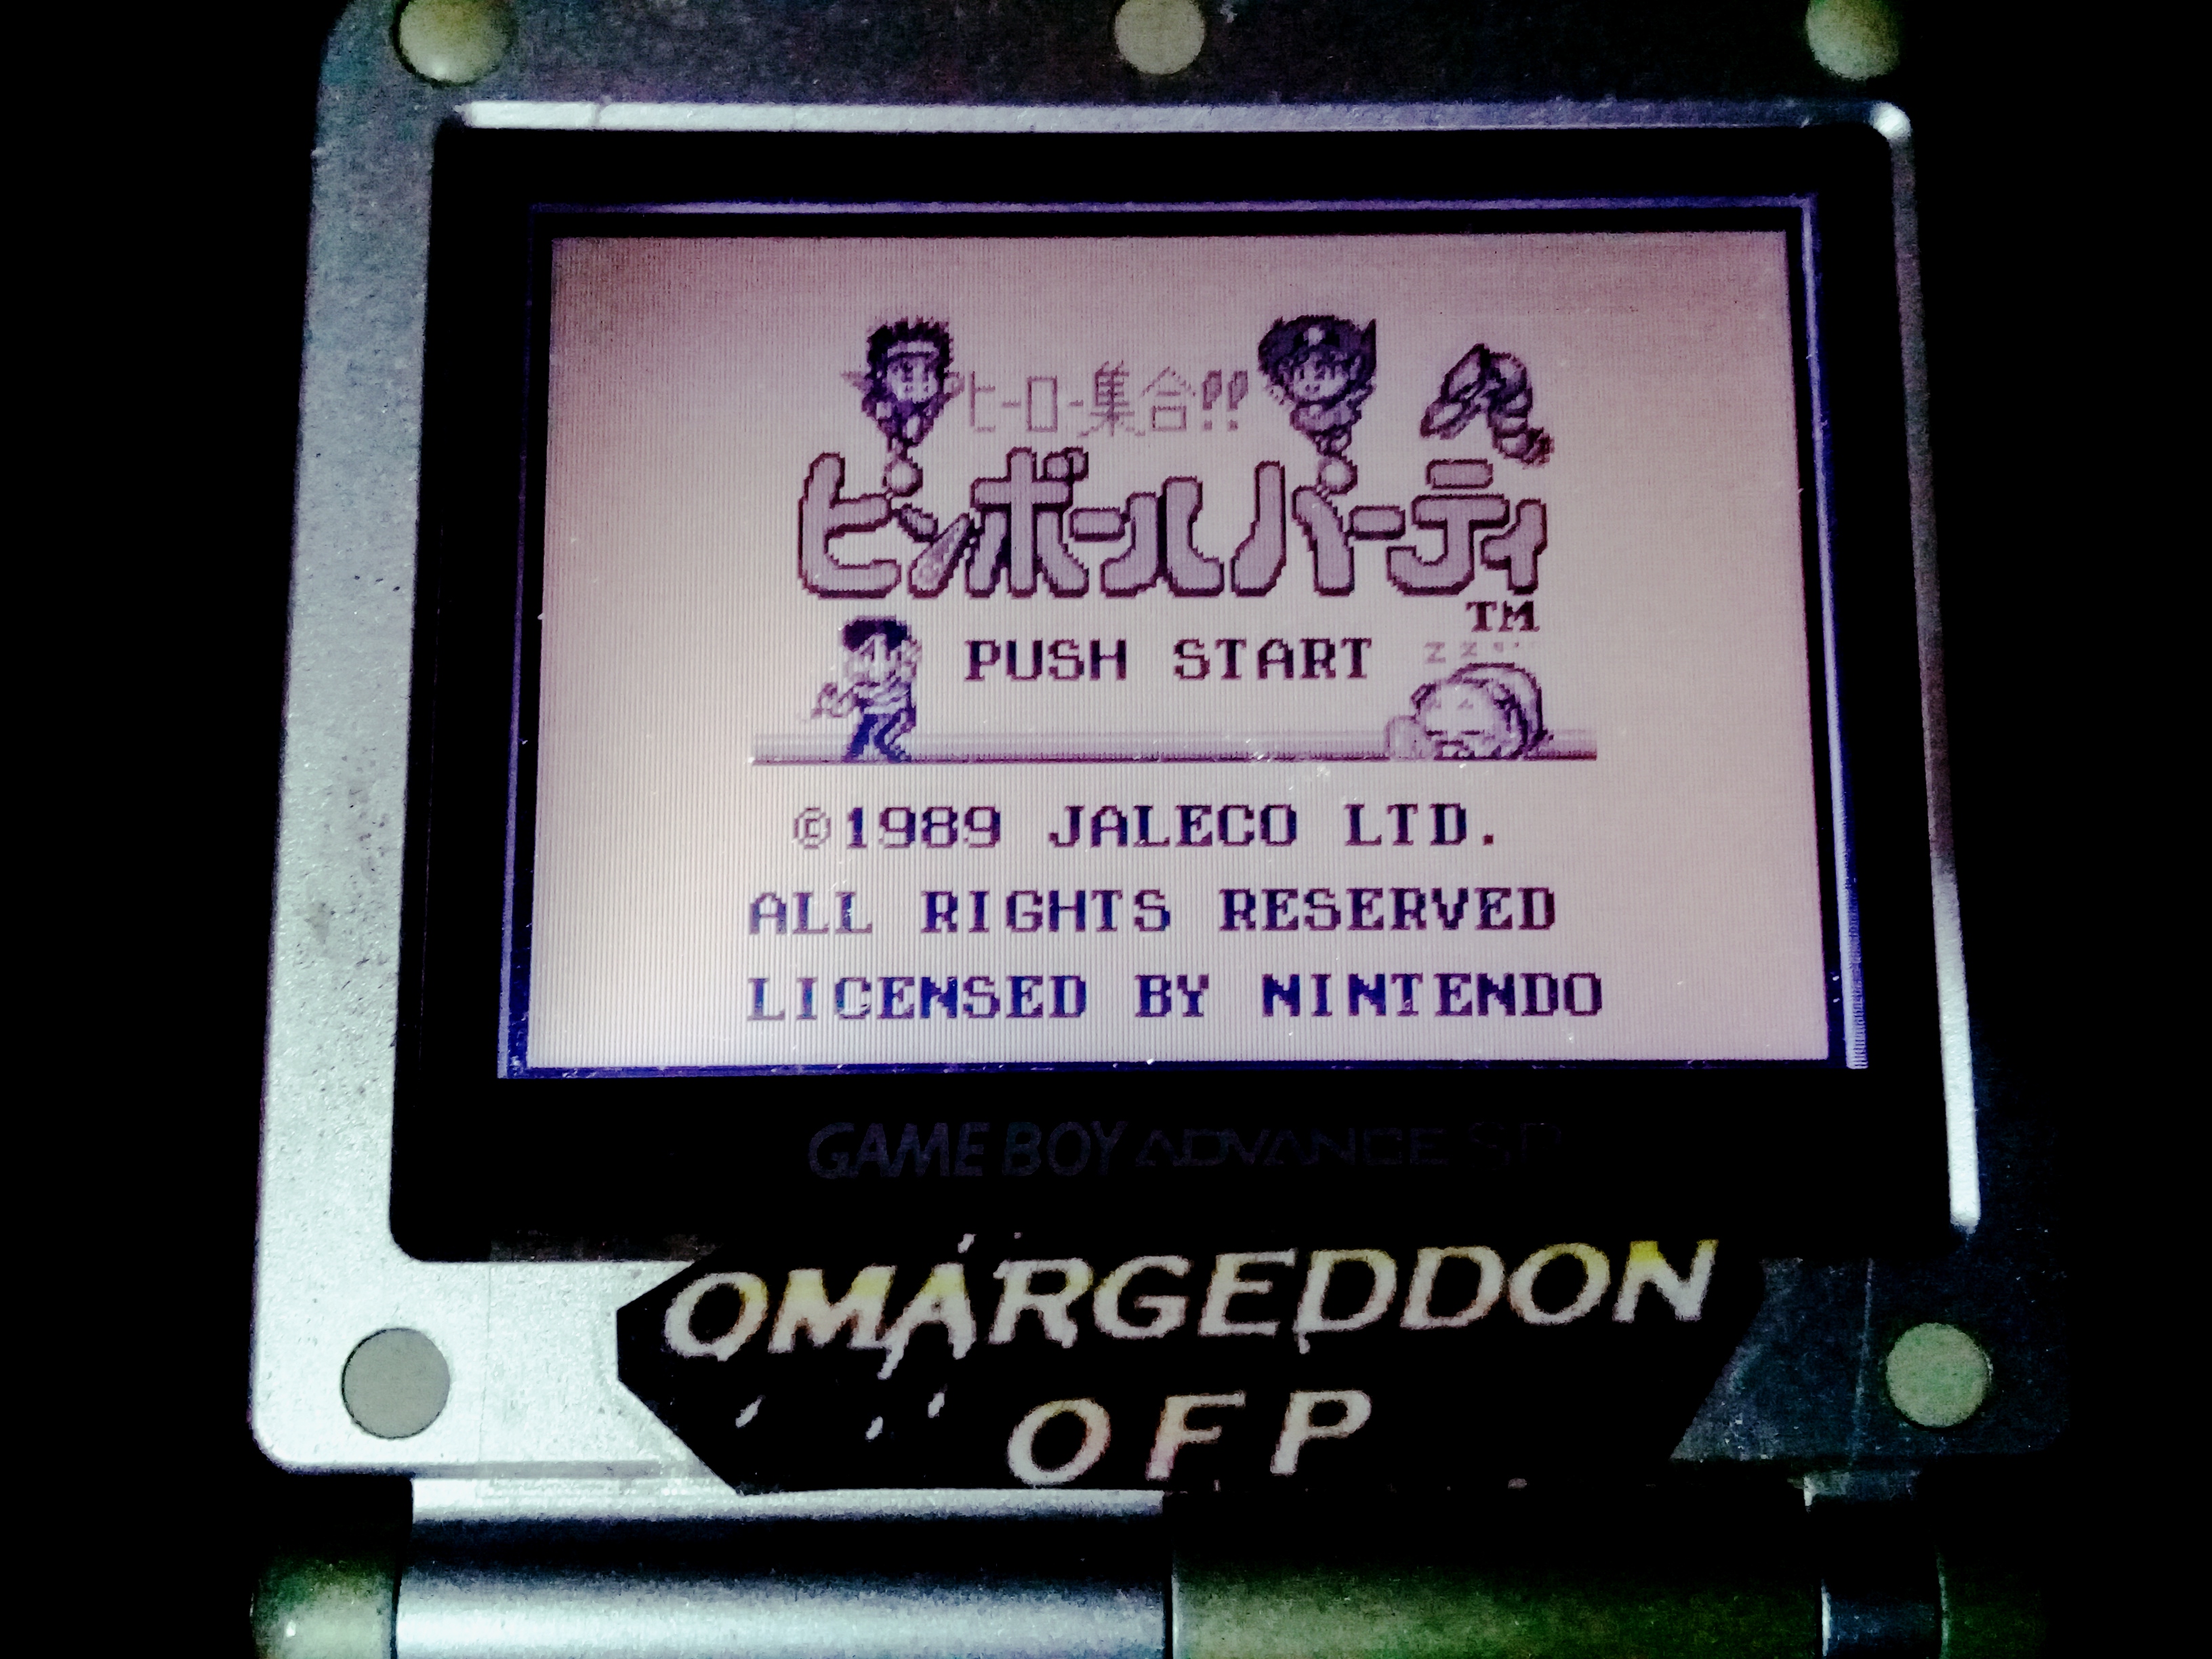 omargeddon: Pinball Party [Normal Game] (Game Boy) 79,100 points on 2020-09-14 01:38:24